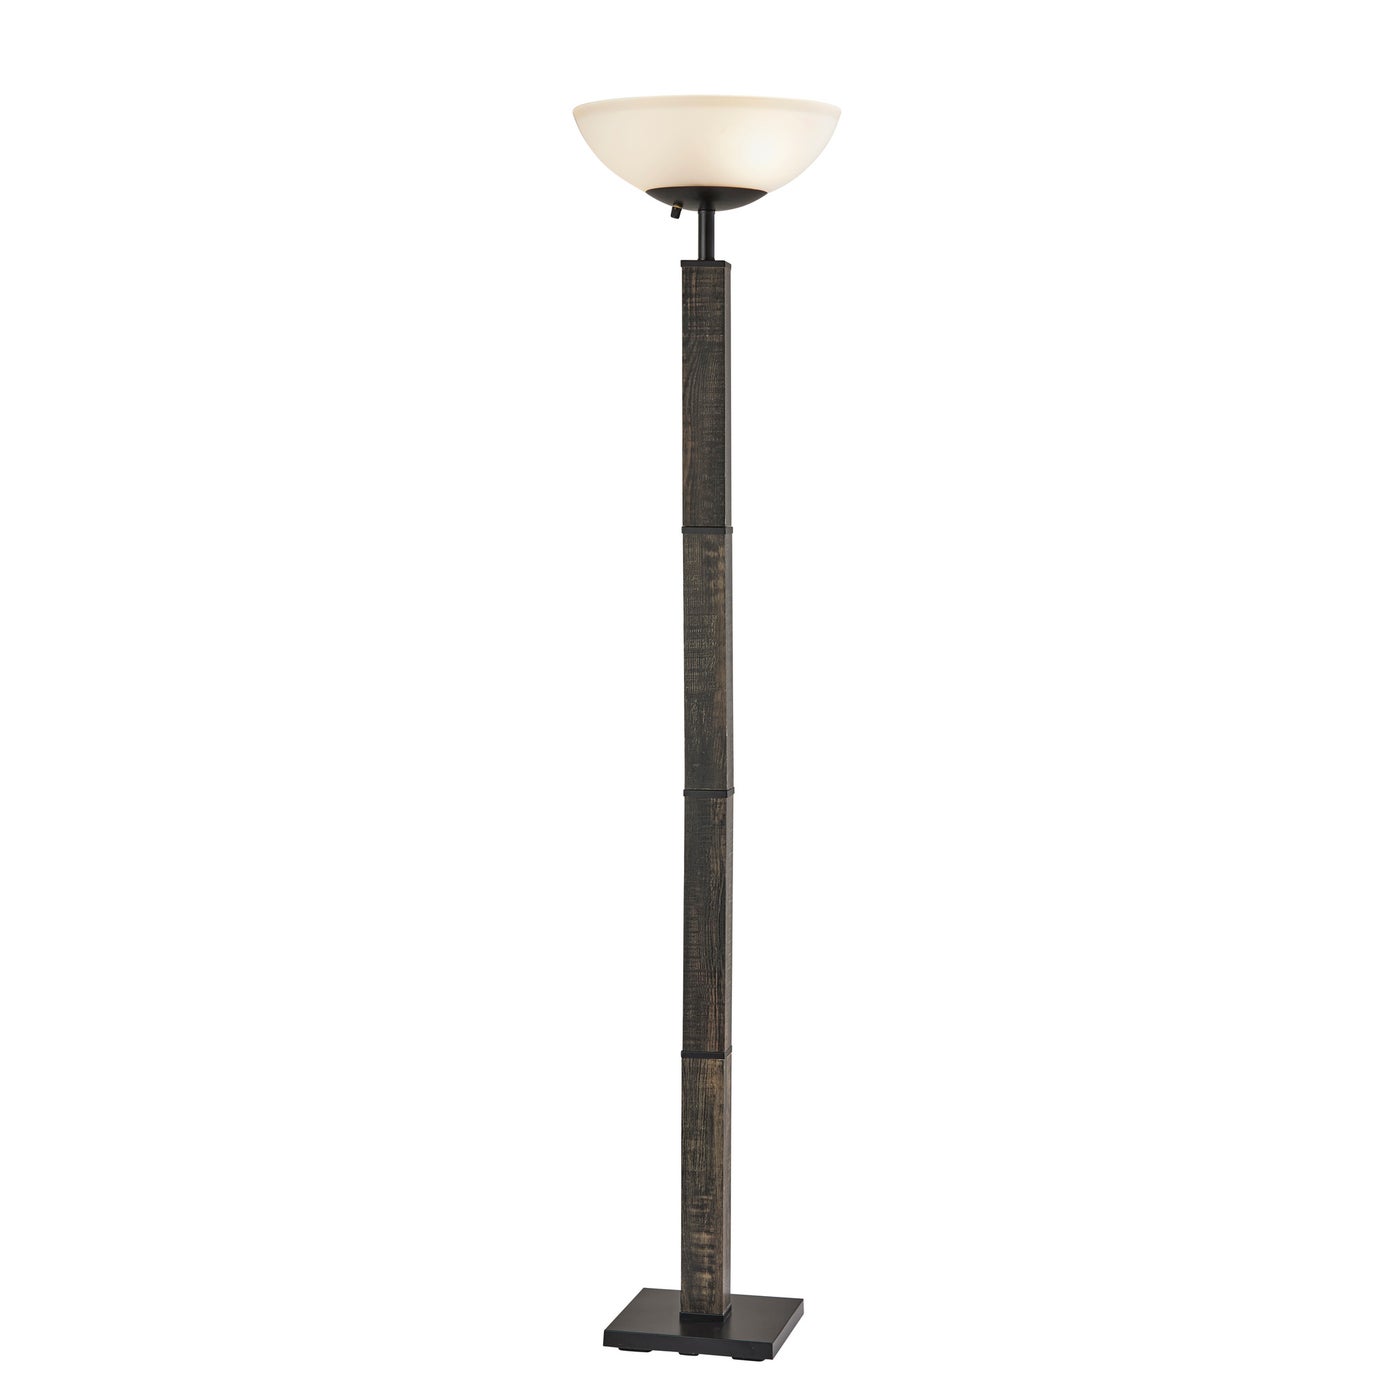 Adesso Home - 3499-01 - Two Light Torchiere - Kona - Mdf W. Black Washed Wood Pvc Veneer & Black Metal Accents